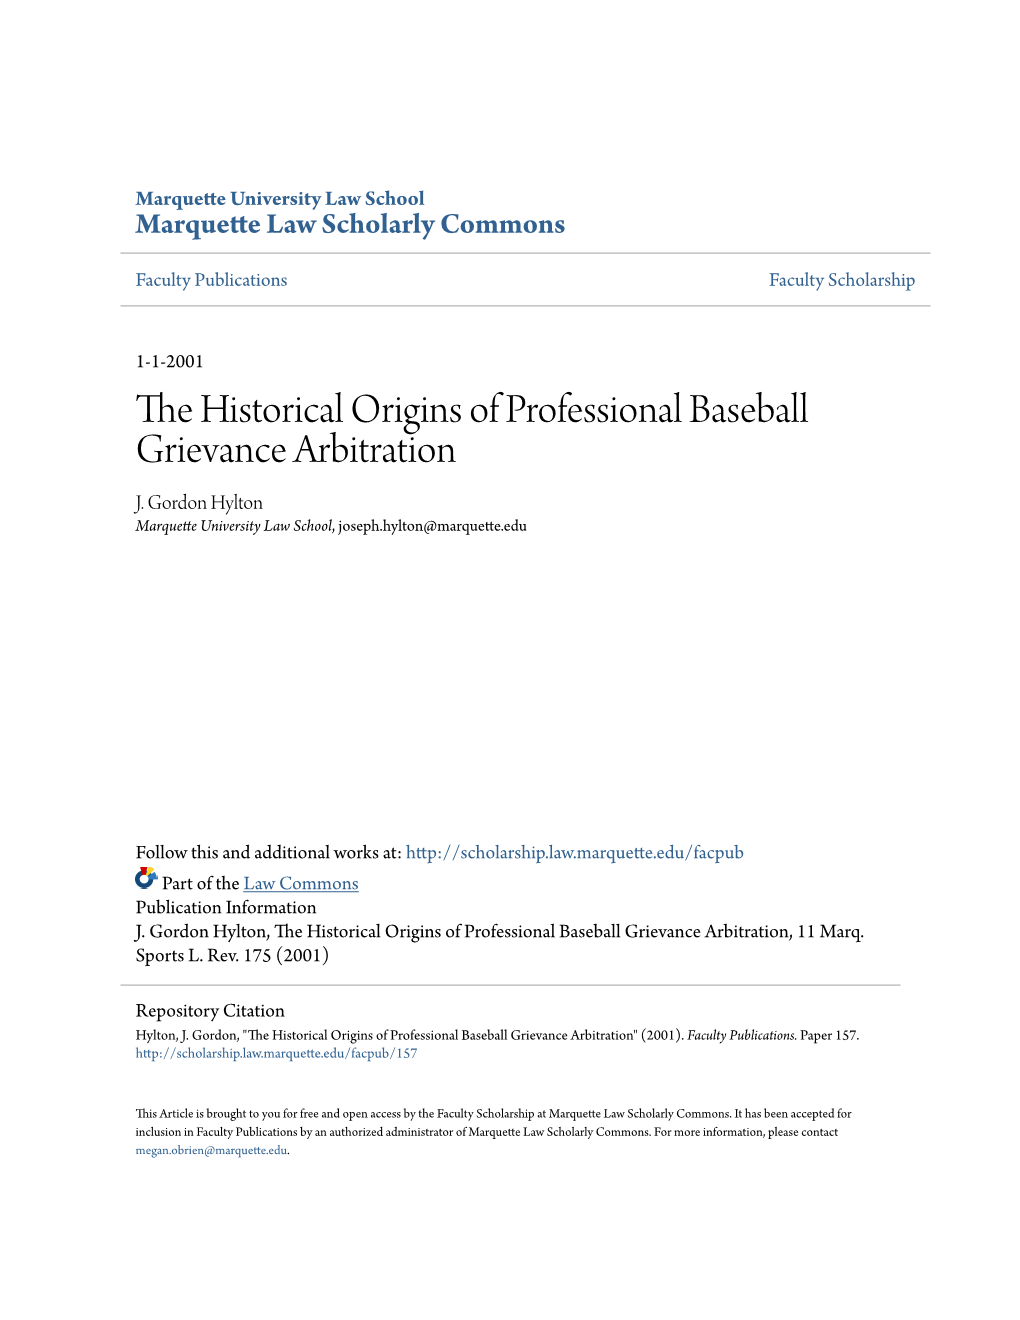 The Historical Origins of Professional Baseball Grievance Arbitration